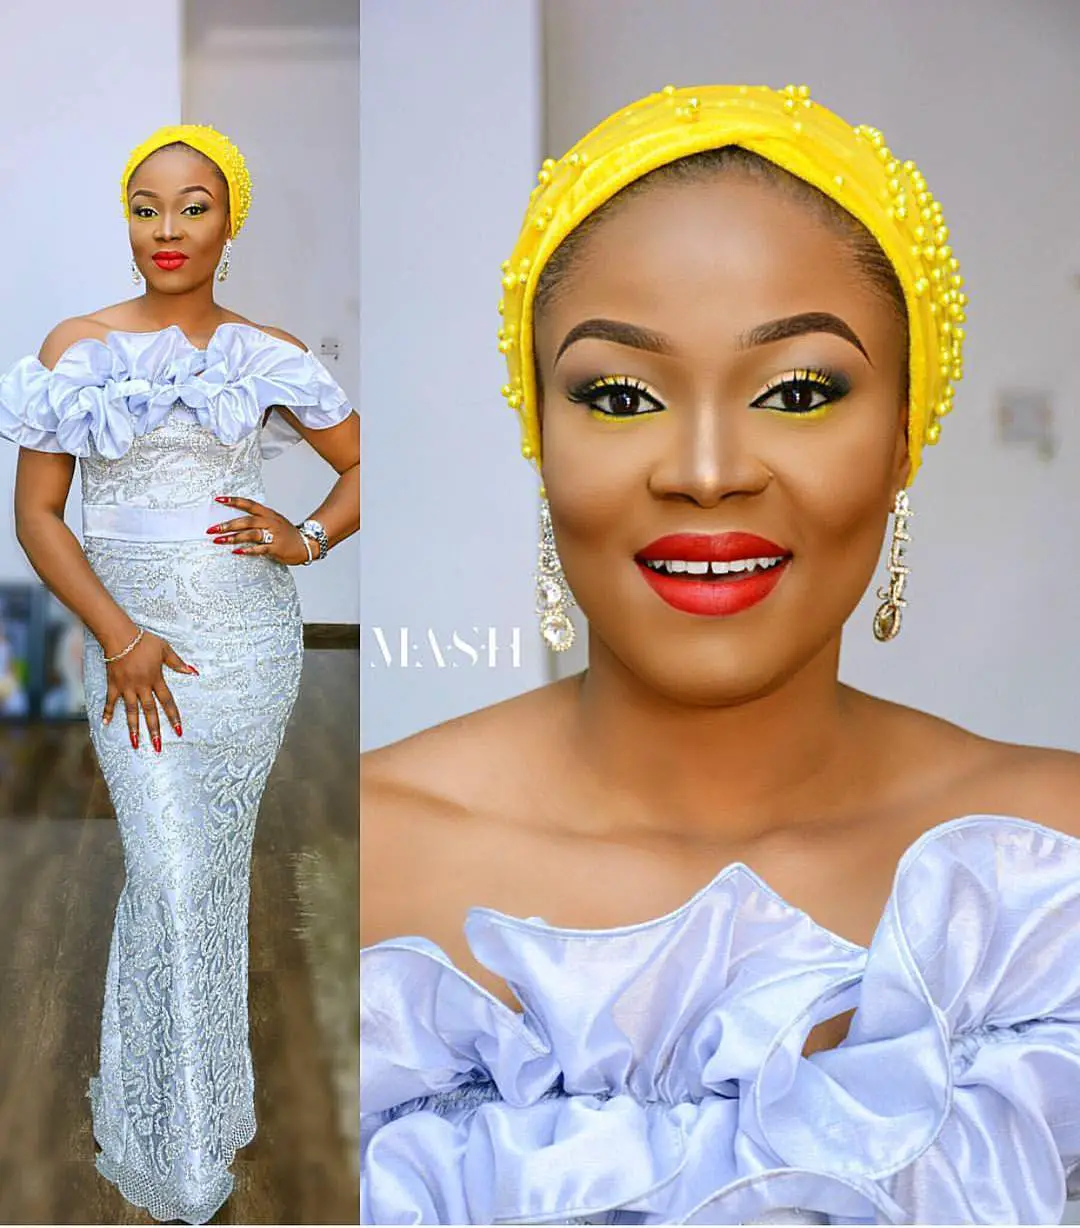 Check out these Latest Aso Ebi Styles Slayed Over The Weekend